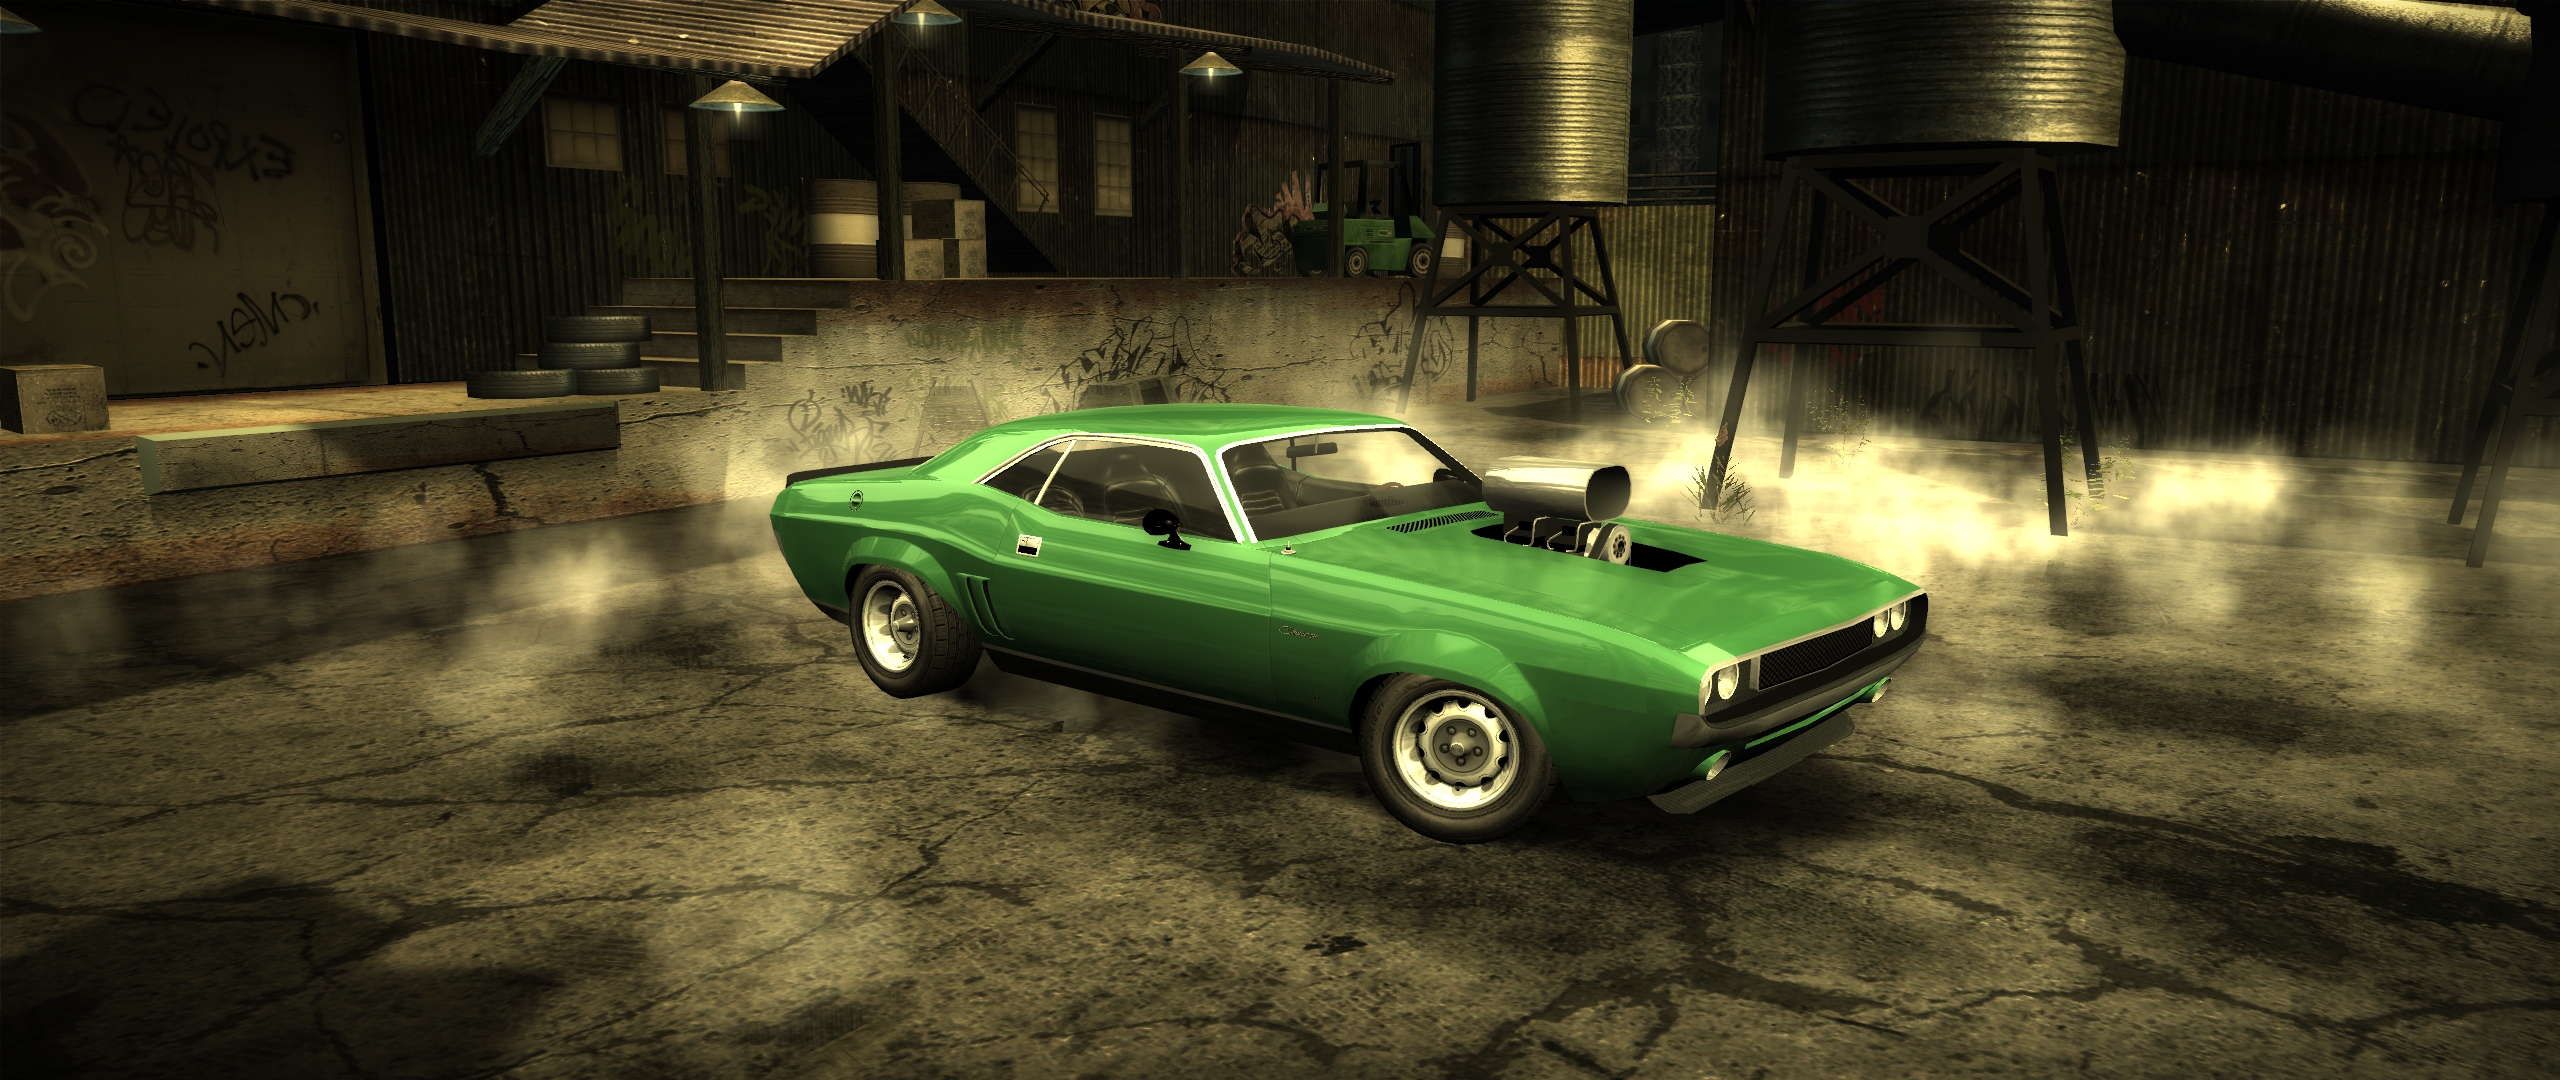 Need For Speed Most Wanted 1971 Dodge Challenger R/T 440 (Gen.1) [Add-On]